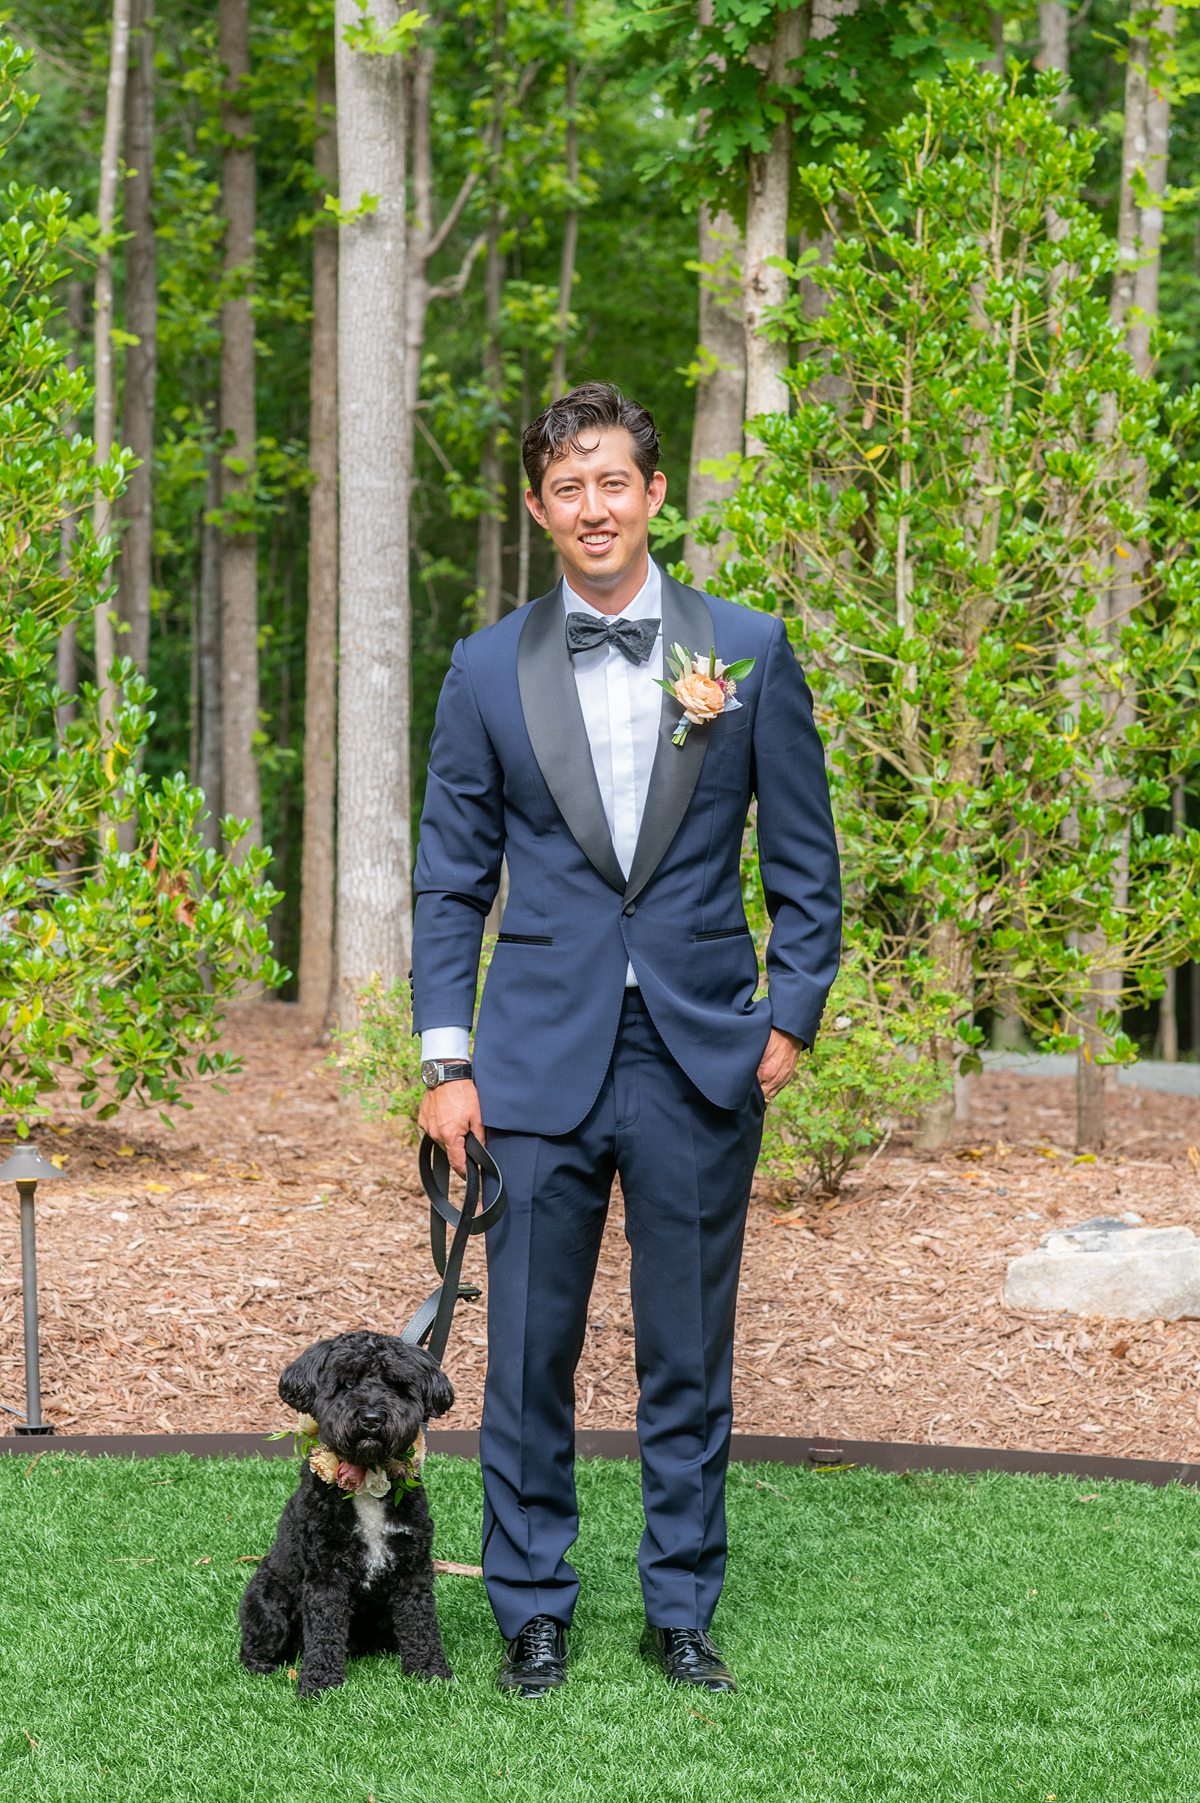 Garden Party Inspired Flower-filled Wedding with a Dog Who Nearly Stole the Show